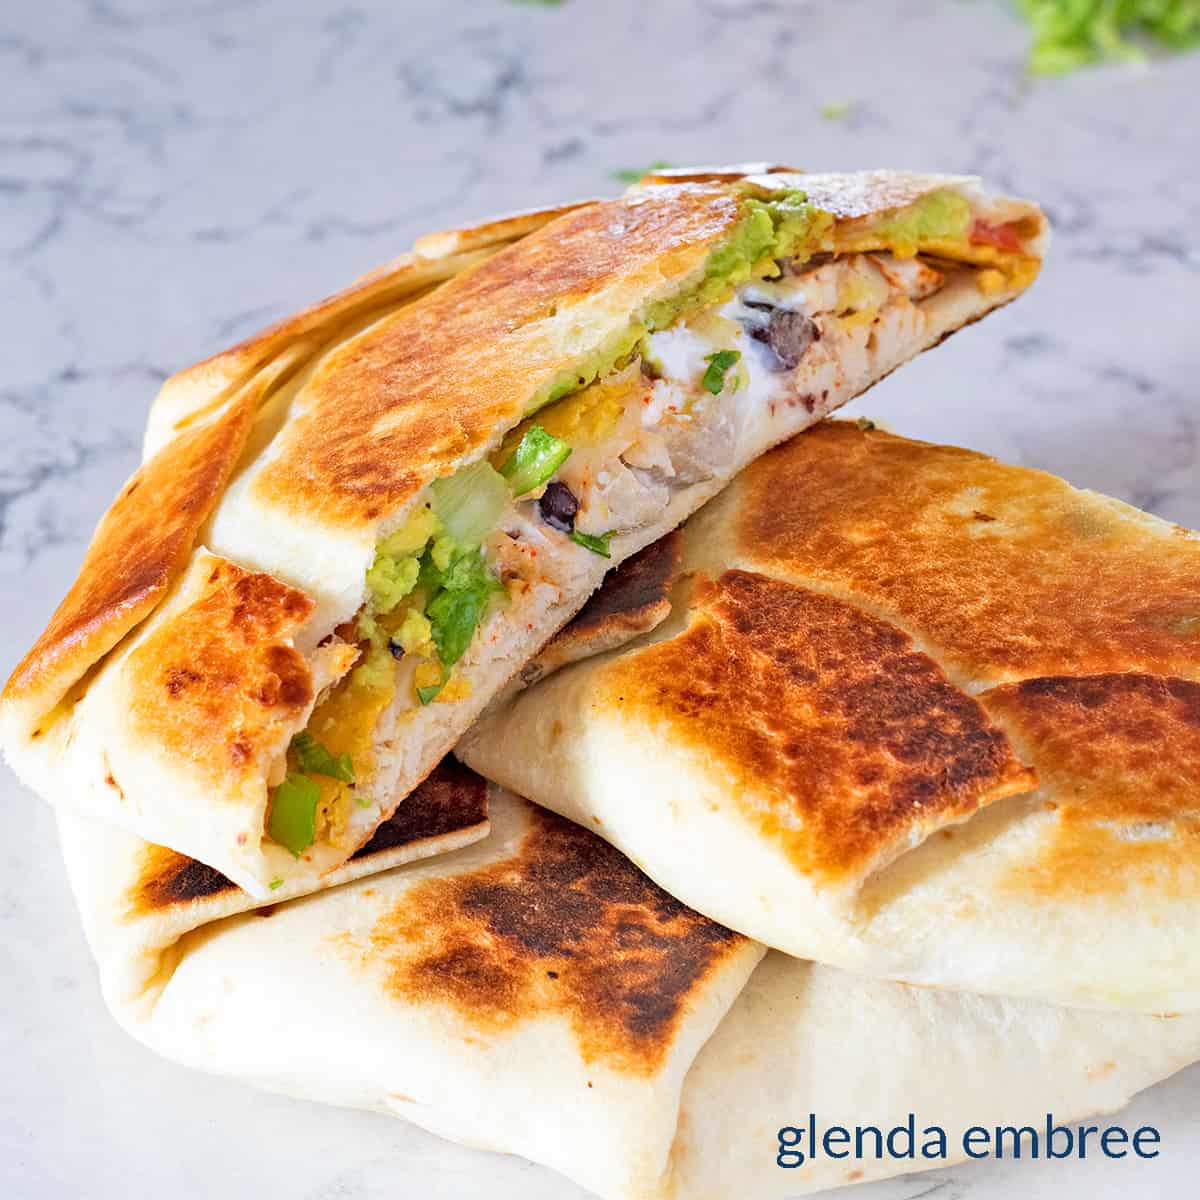 Chicken Crunch Wrap Supreme cut in half and placed on marble countertop - chicken, black beans, cheese, lettuce, tomato, sour cream and a crisp tostada shell wrapped in a burrito size flour tortilla to create a crisp, hand-held pocket sandwich.